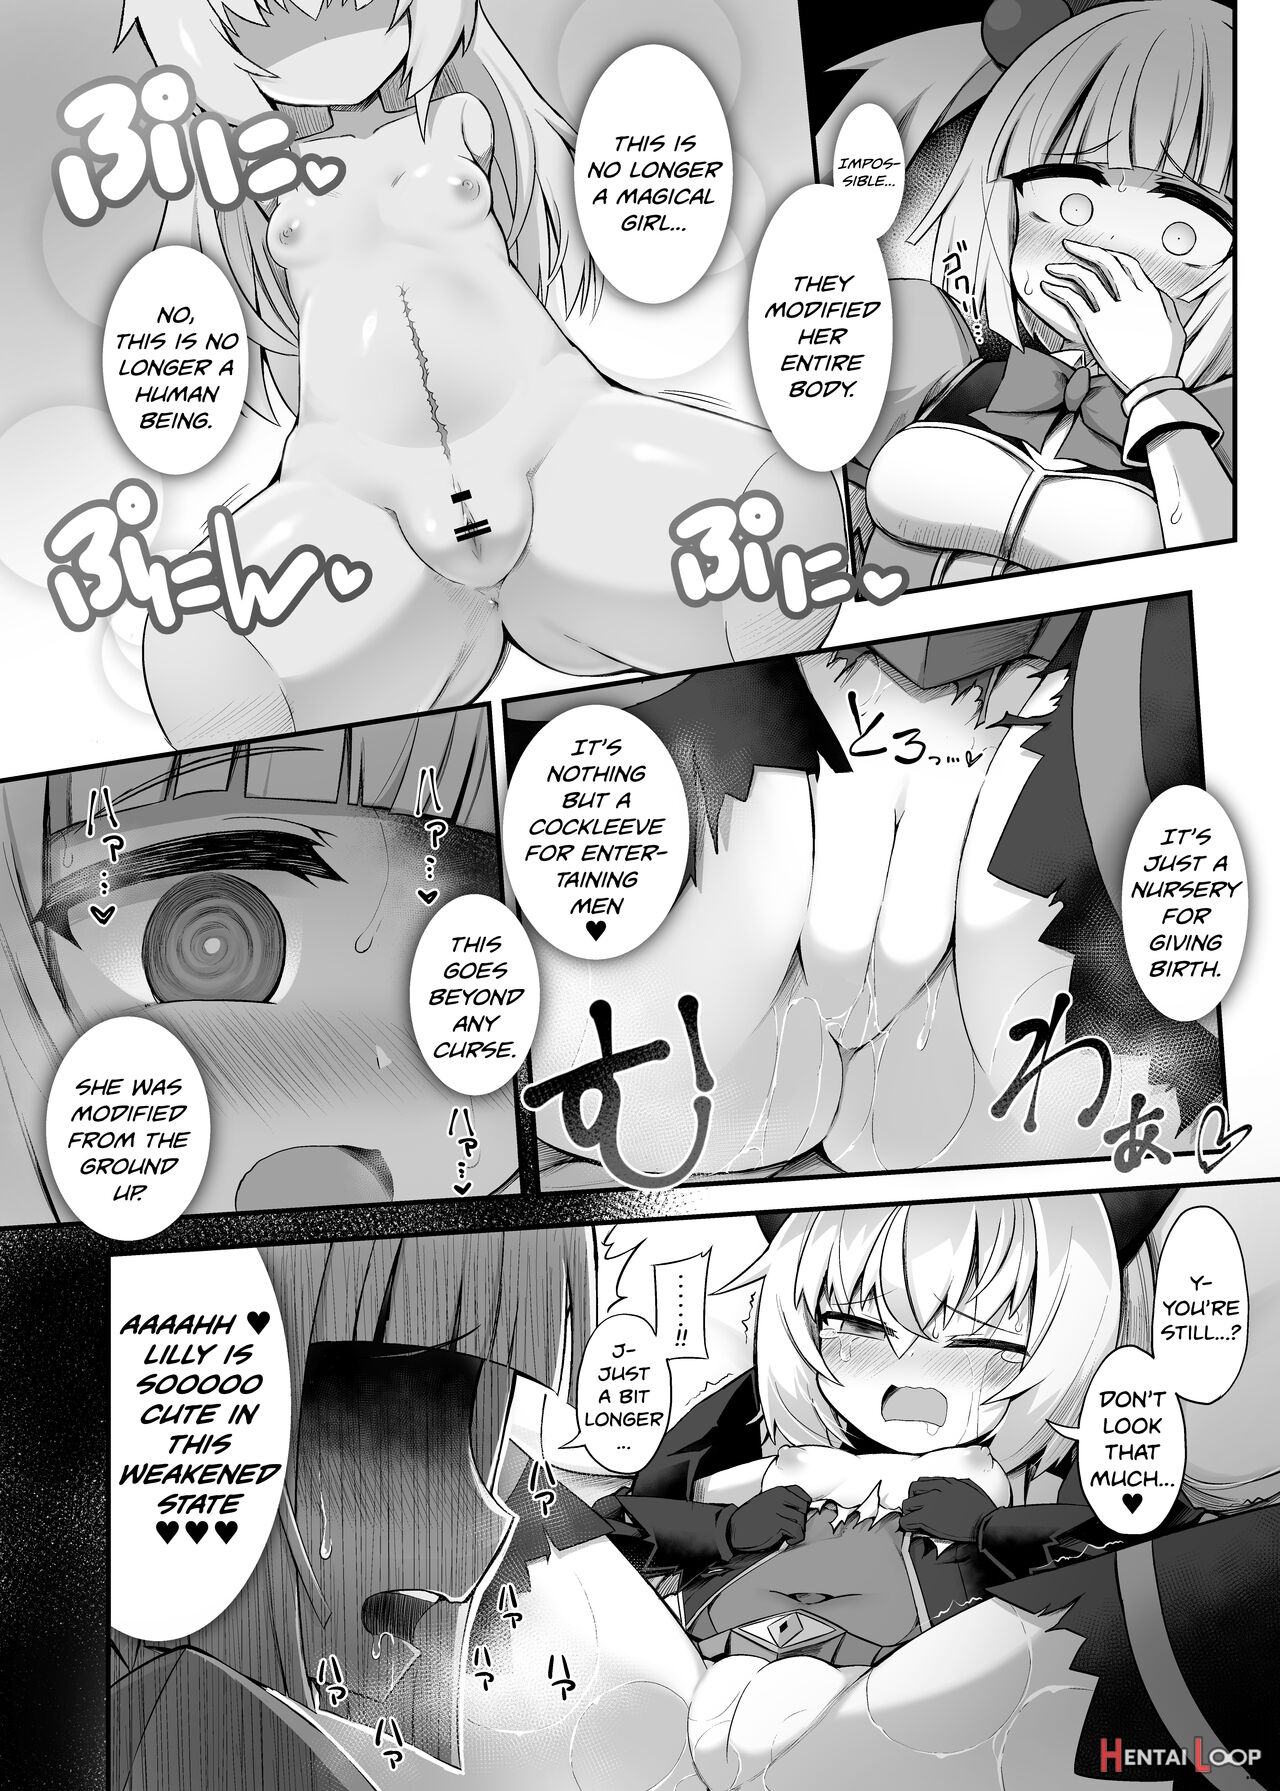 Masochist Cat X Magic Girl ~a Manga In Which The Evil Magical Girl Is Put On A Leash And Domesticated By The Good Magical Girl~ page 17